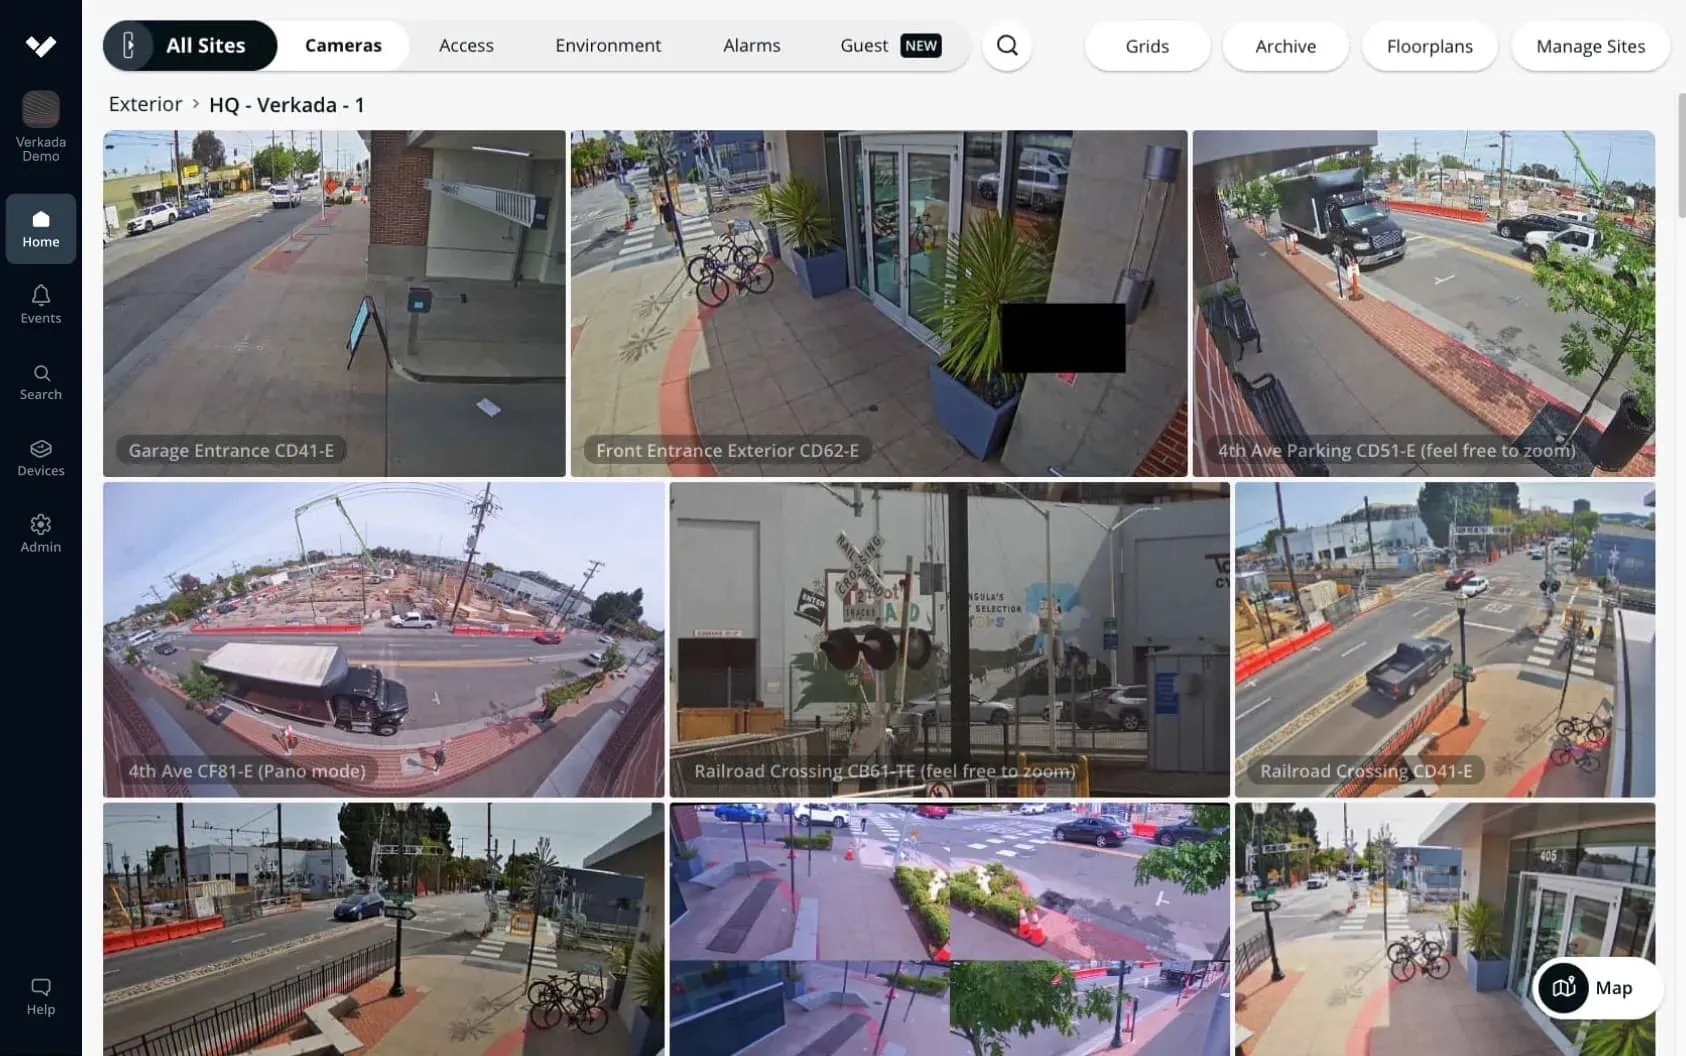 Remote monitoring with auto tracking security cameras